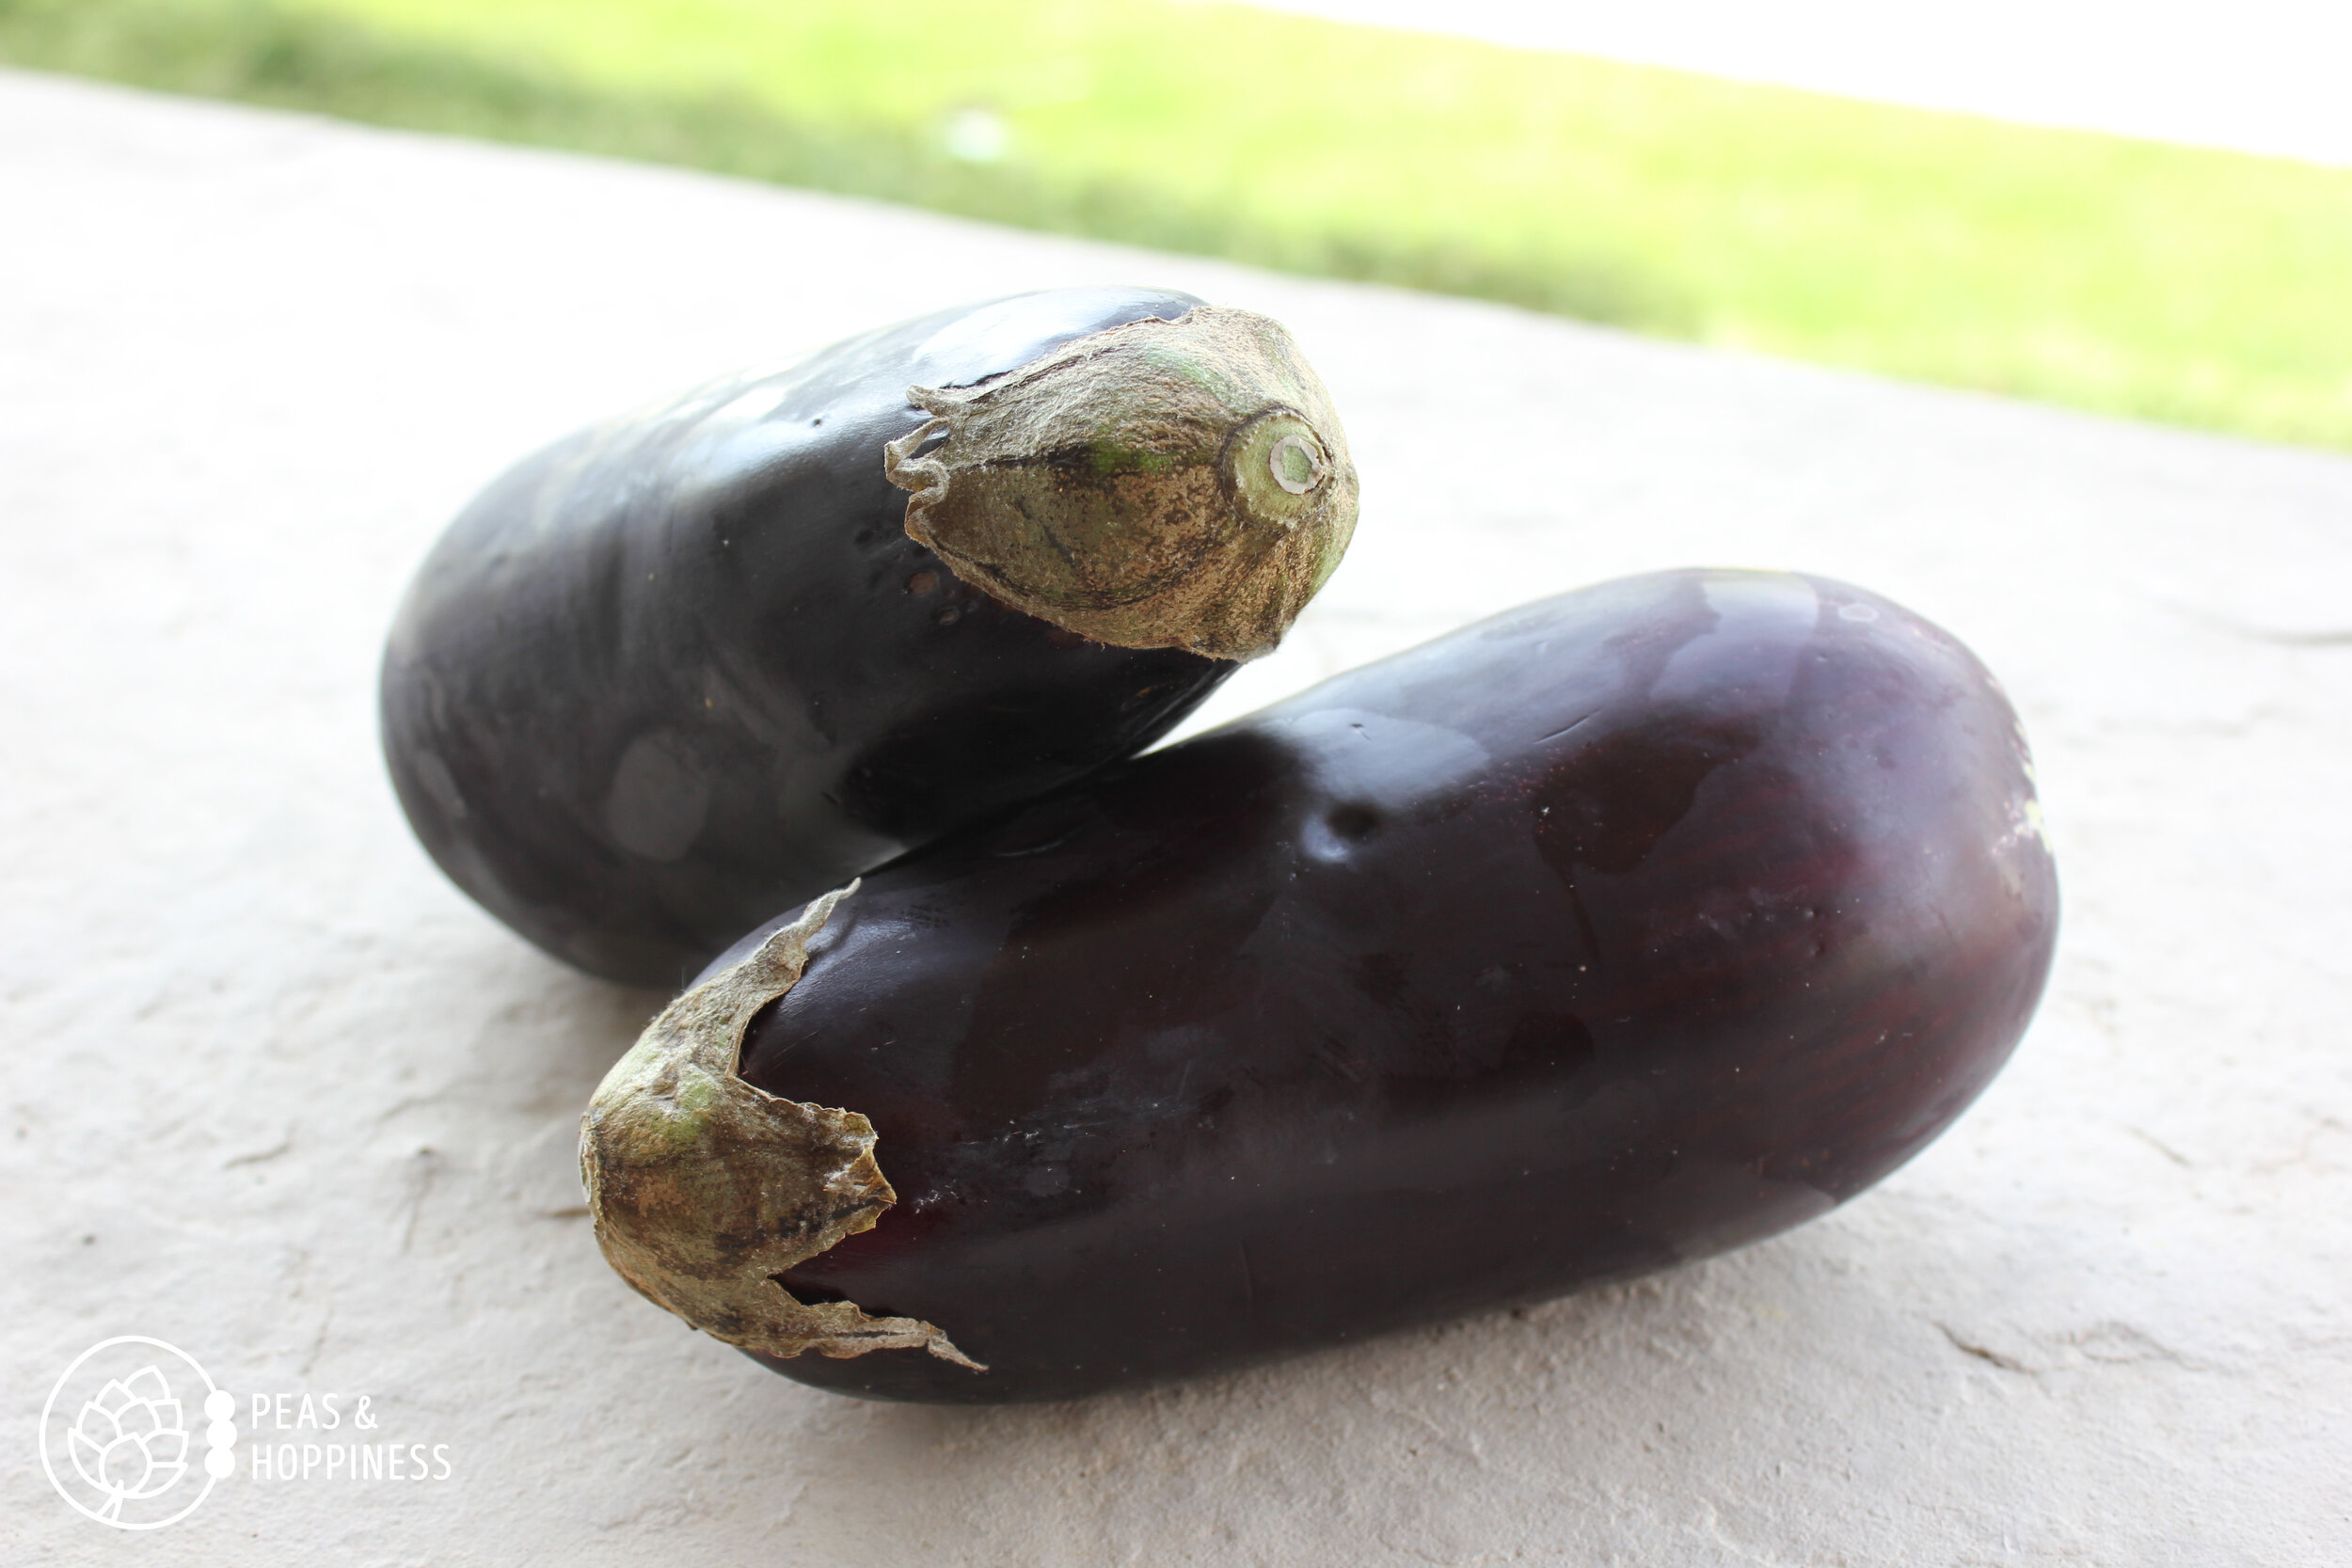 Recipe for Savory Eggplant over Rice - How to Make Eggplant Taste Good - Registered Dietitian Ann Kent of Peas and Hoppiness